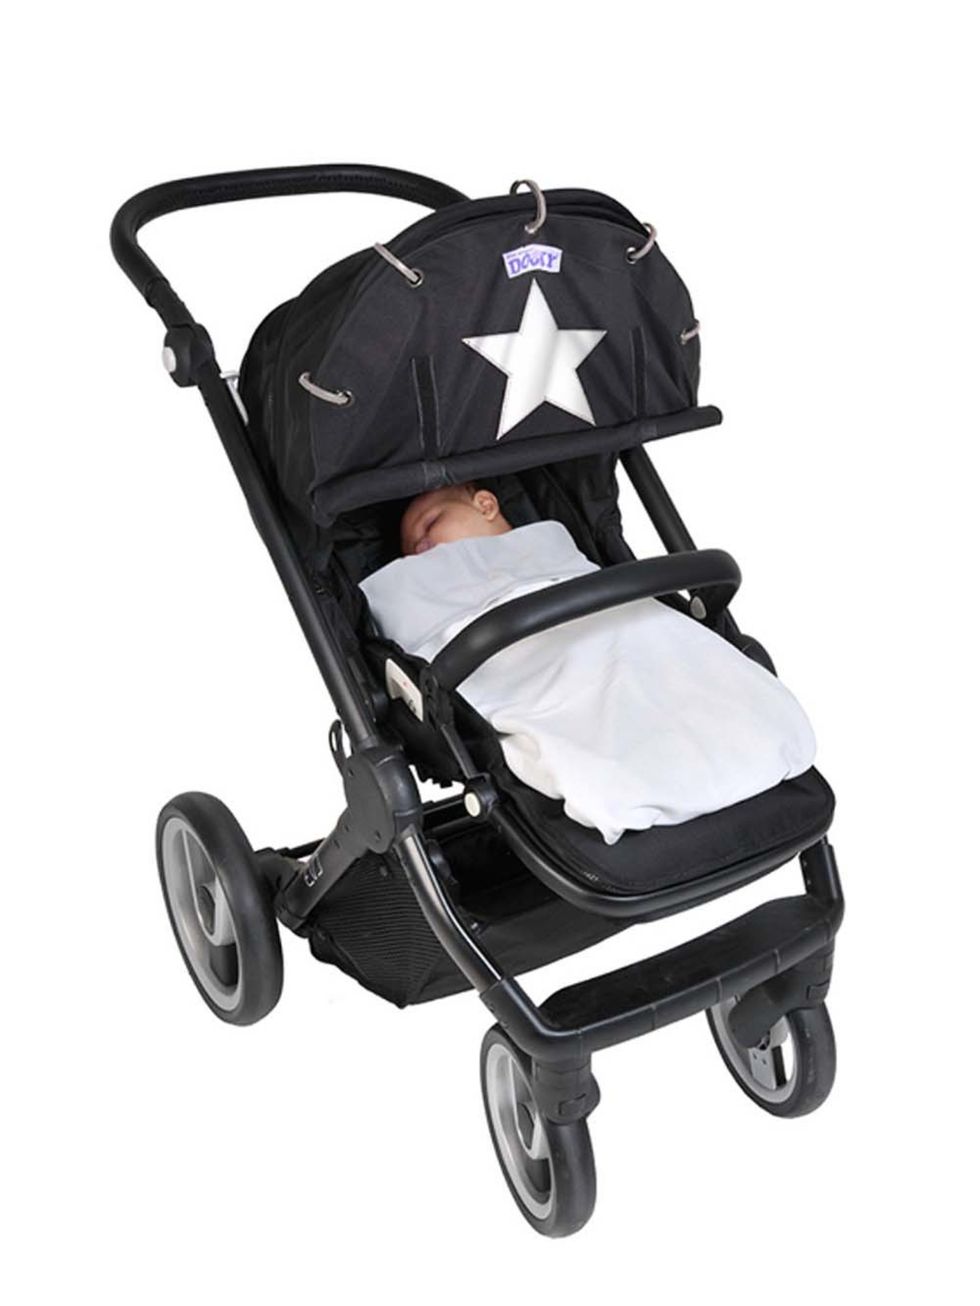 Baby carriage, Product, Baby Products, Comfort, Black, Rolling, Baby safety, Baby, Silver, Cleanliness, 